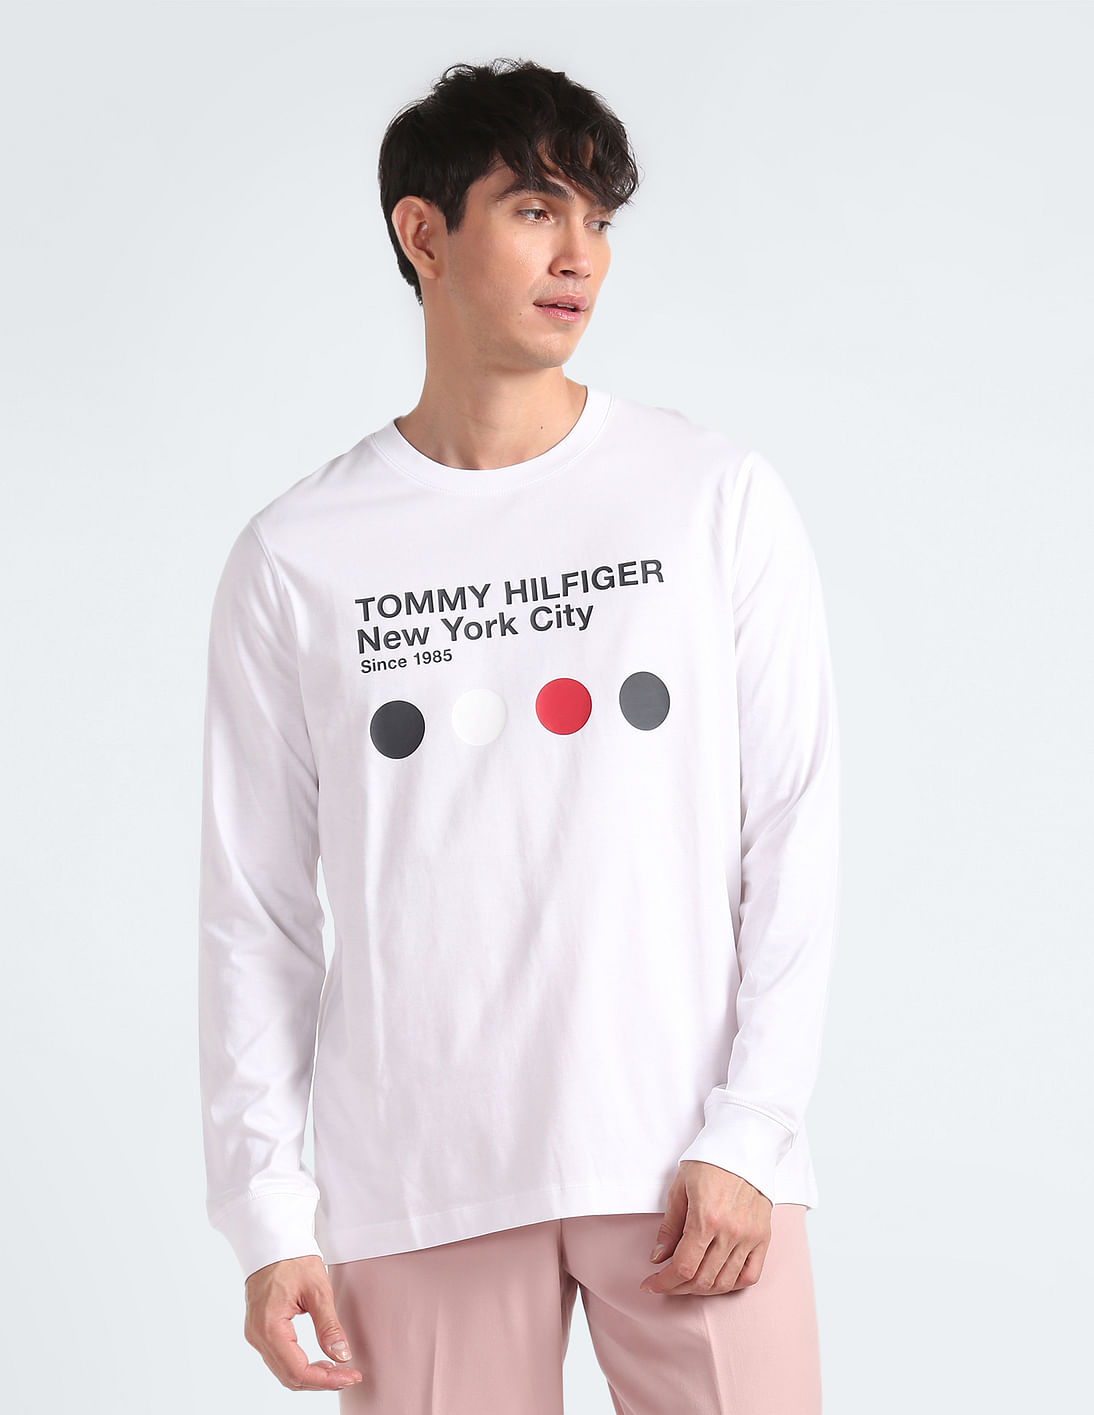 Hilfiger Sleeve Tommy Typographic T-Shirt Long Buy Print